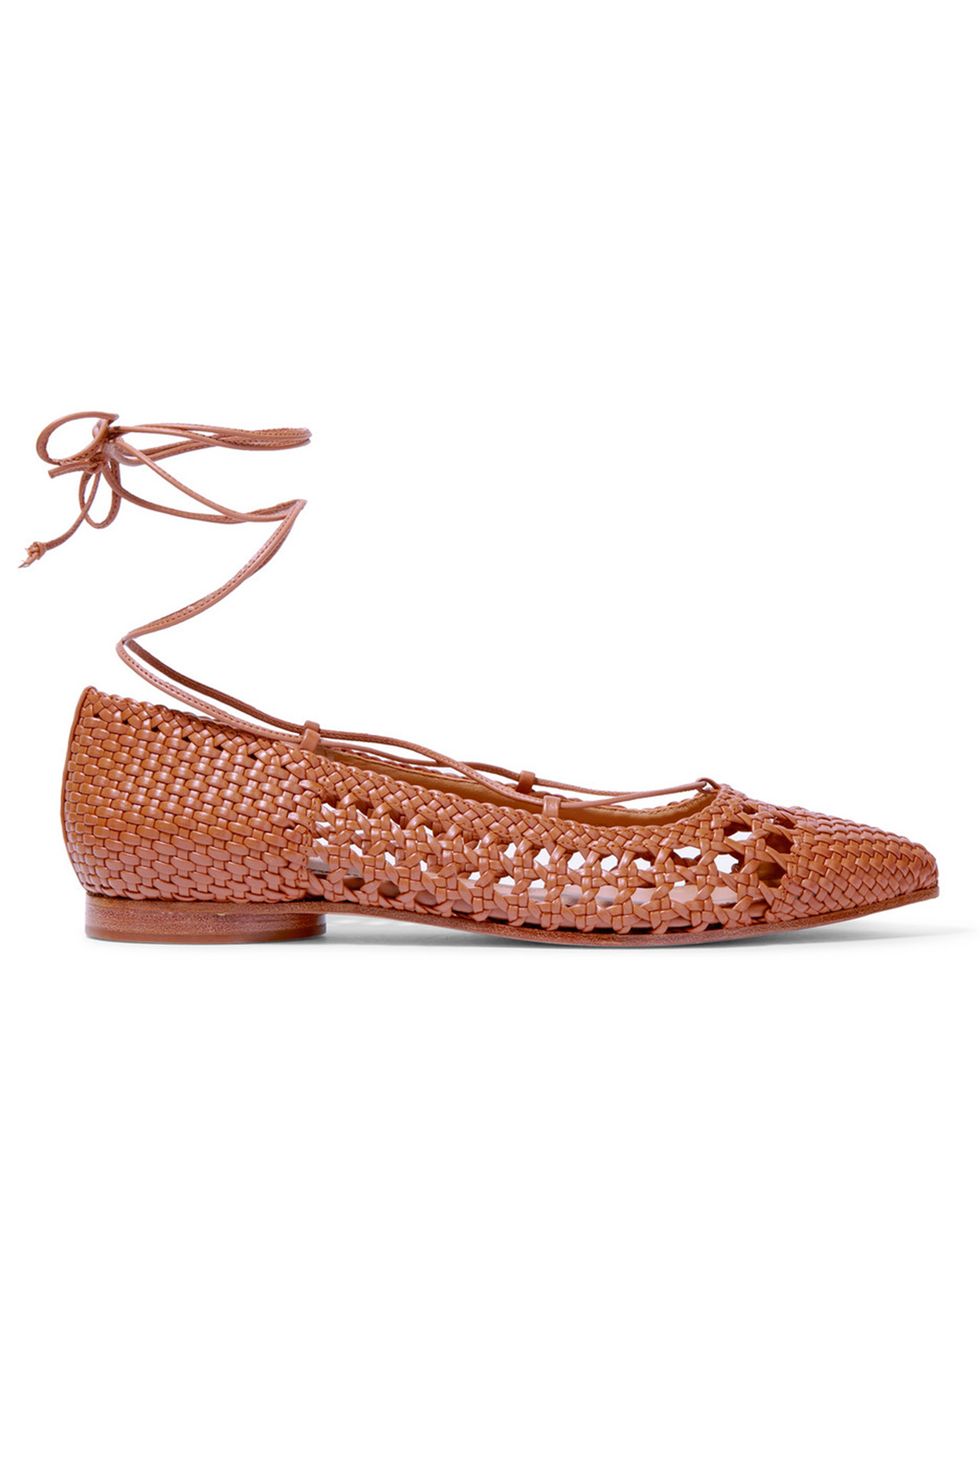 Ghillie shoes, best Ghillie shoes, lace up flats